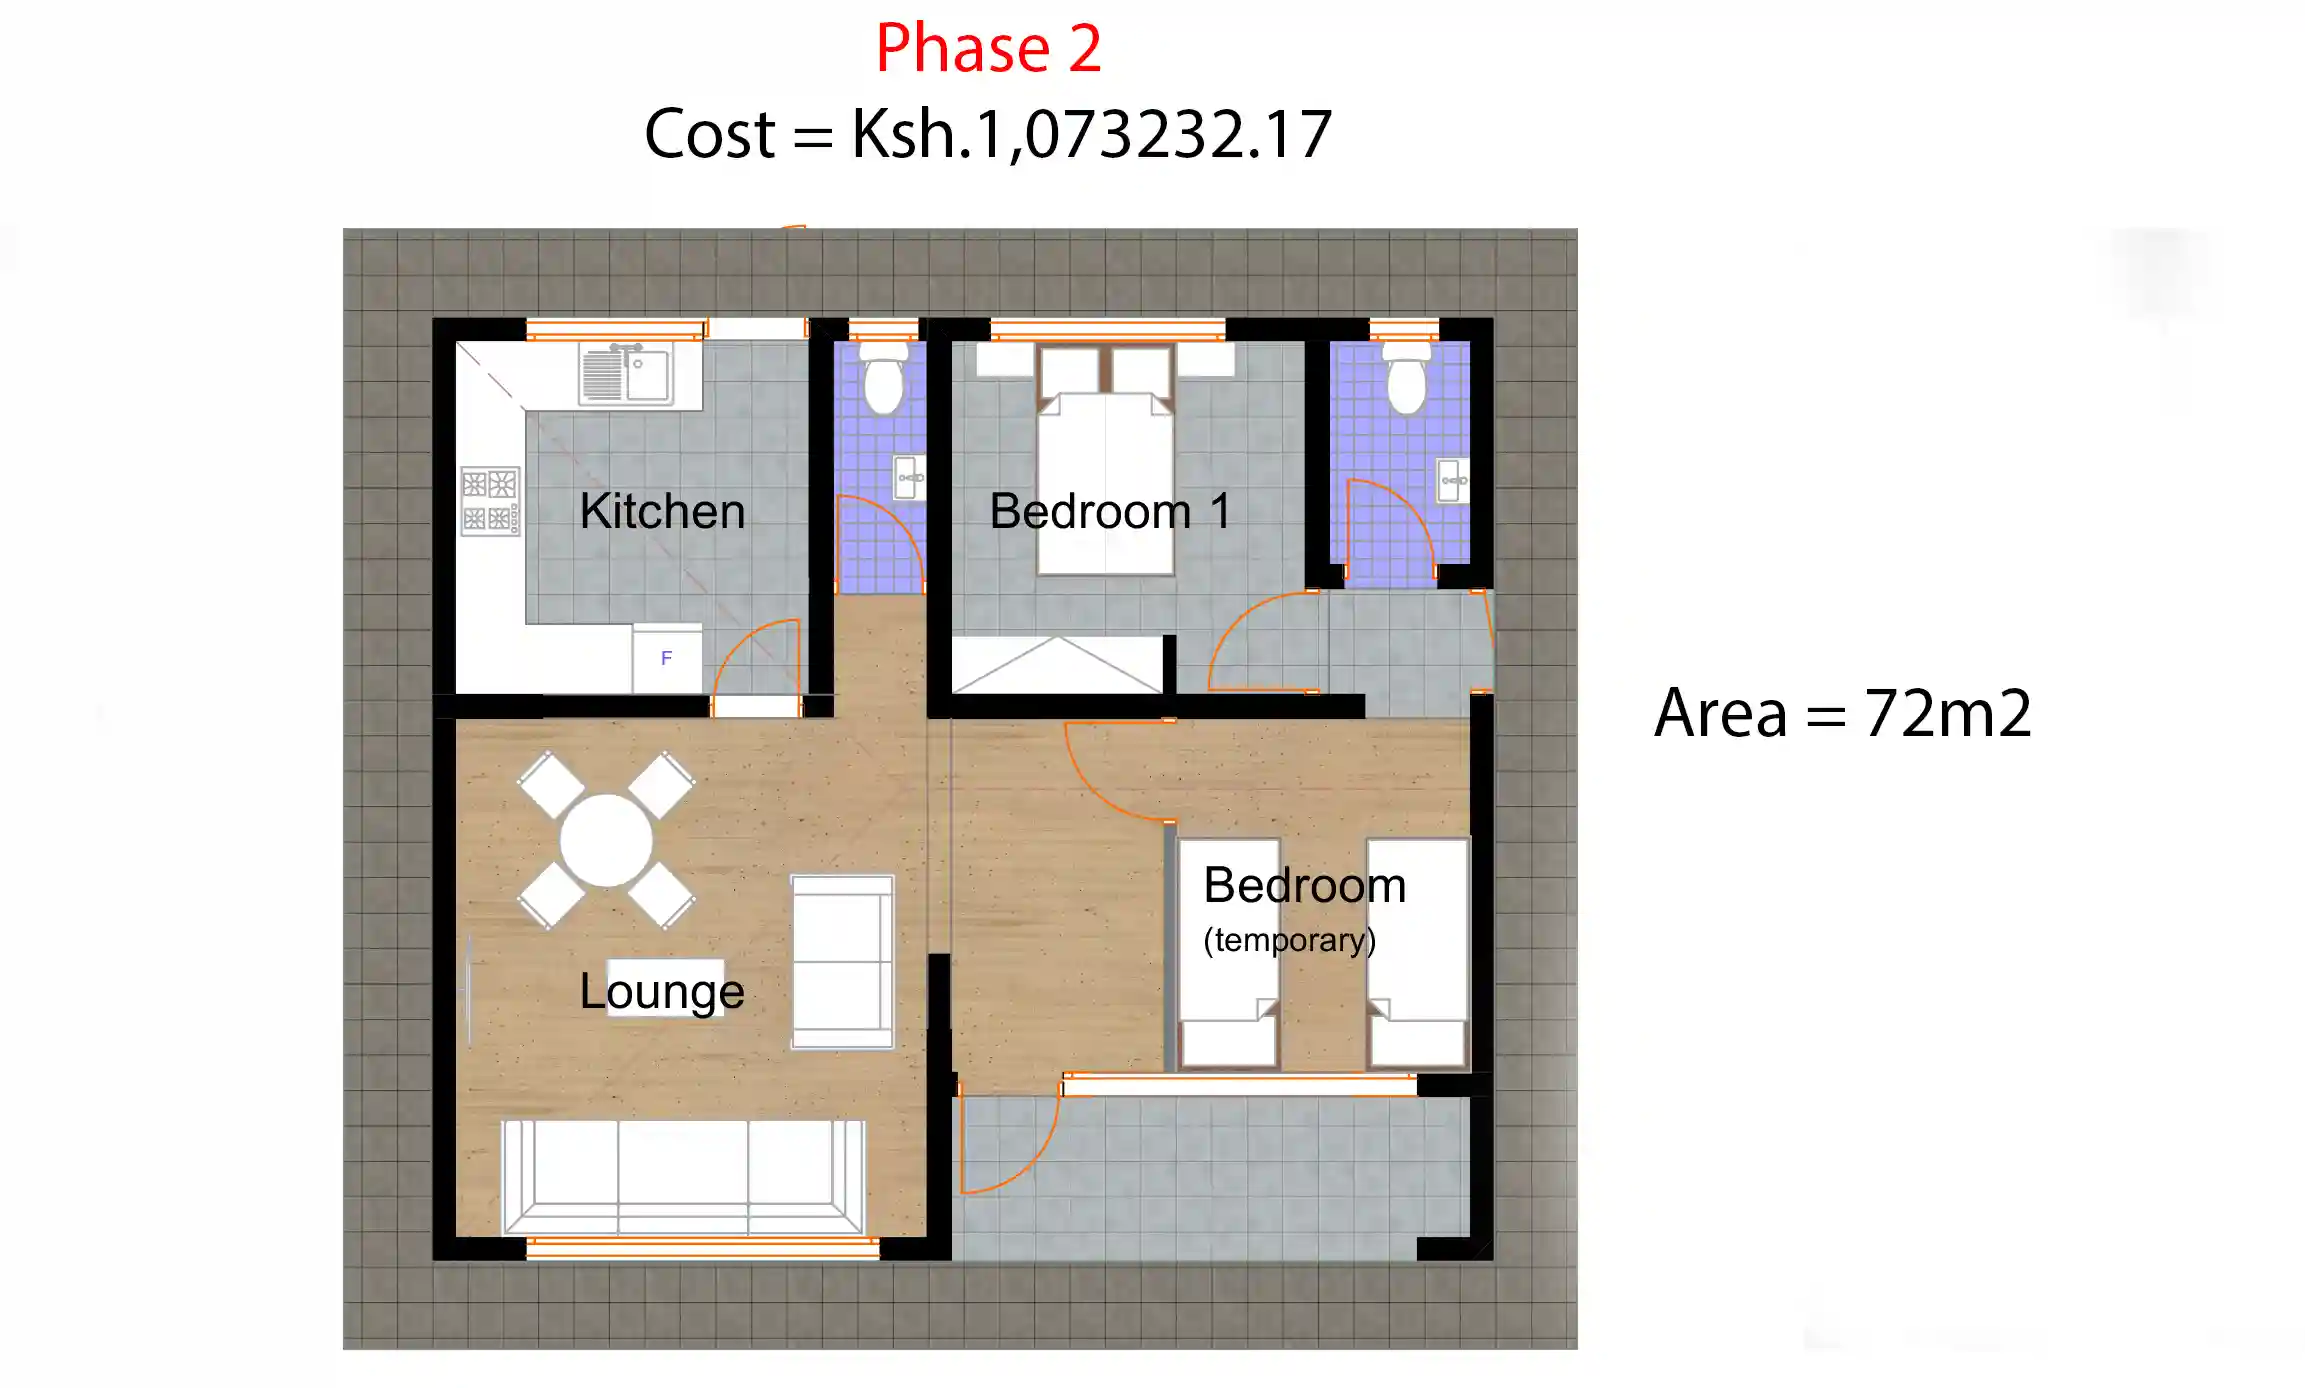 3 Bedroom Bungalow - ID 31101 - phase2plan.png from Inuua Tujenge house plans with 3 bedrooms and 2 bathrooms. ( jengapolepole )